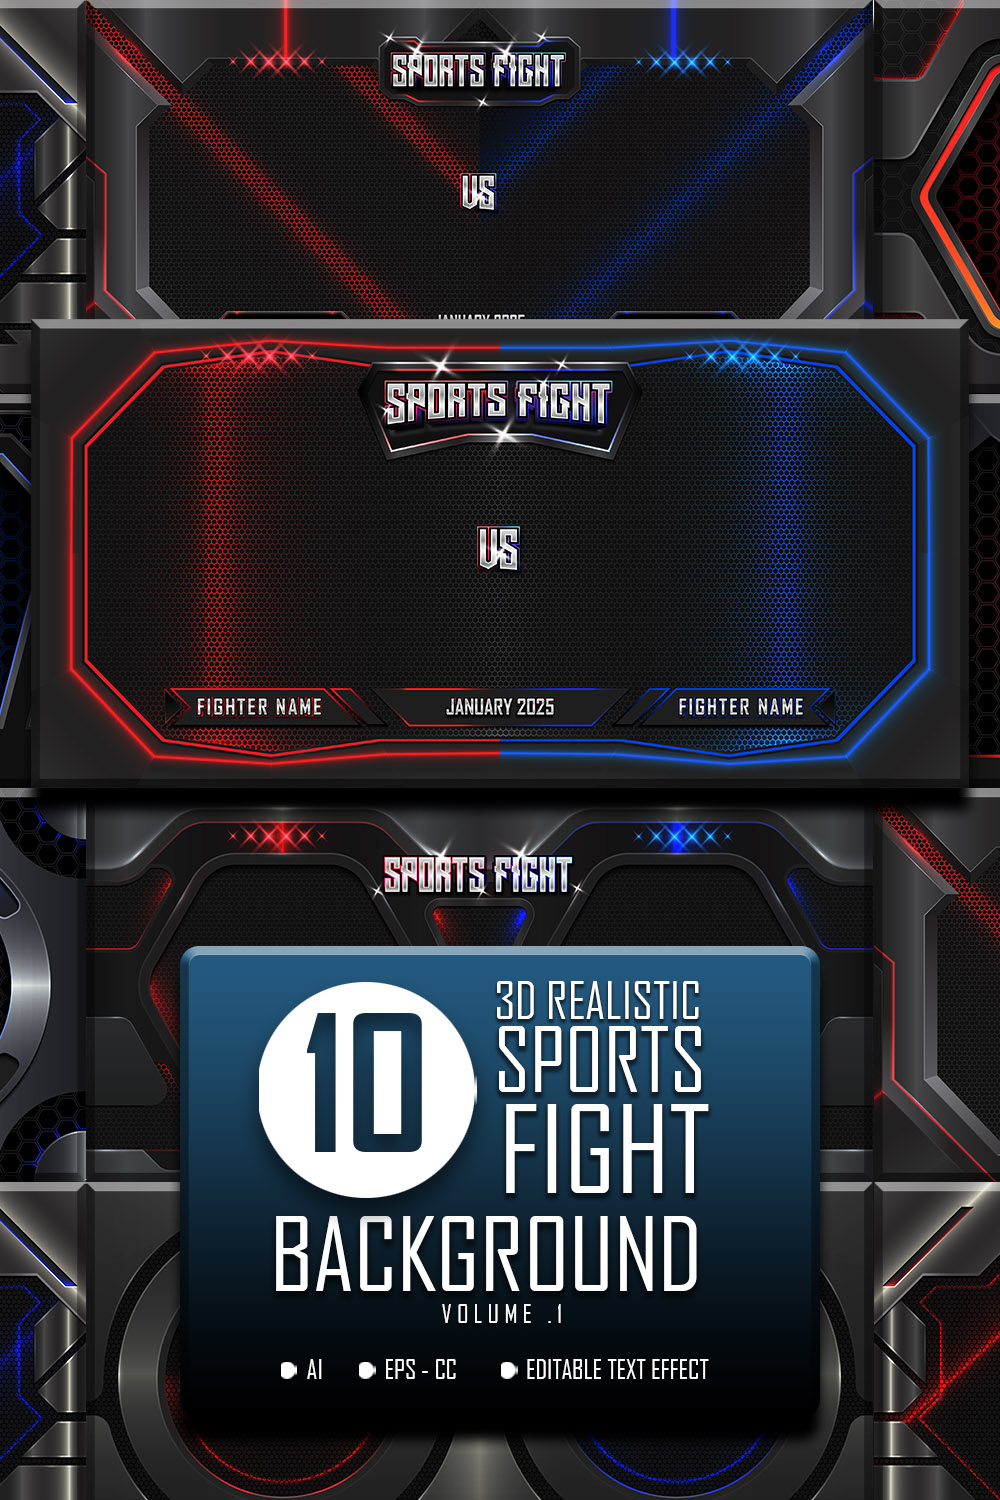 10 Sports Fight Posters and Backgrounds in 3D Realistic Style pinterest image.